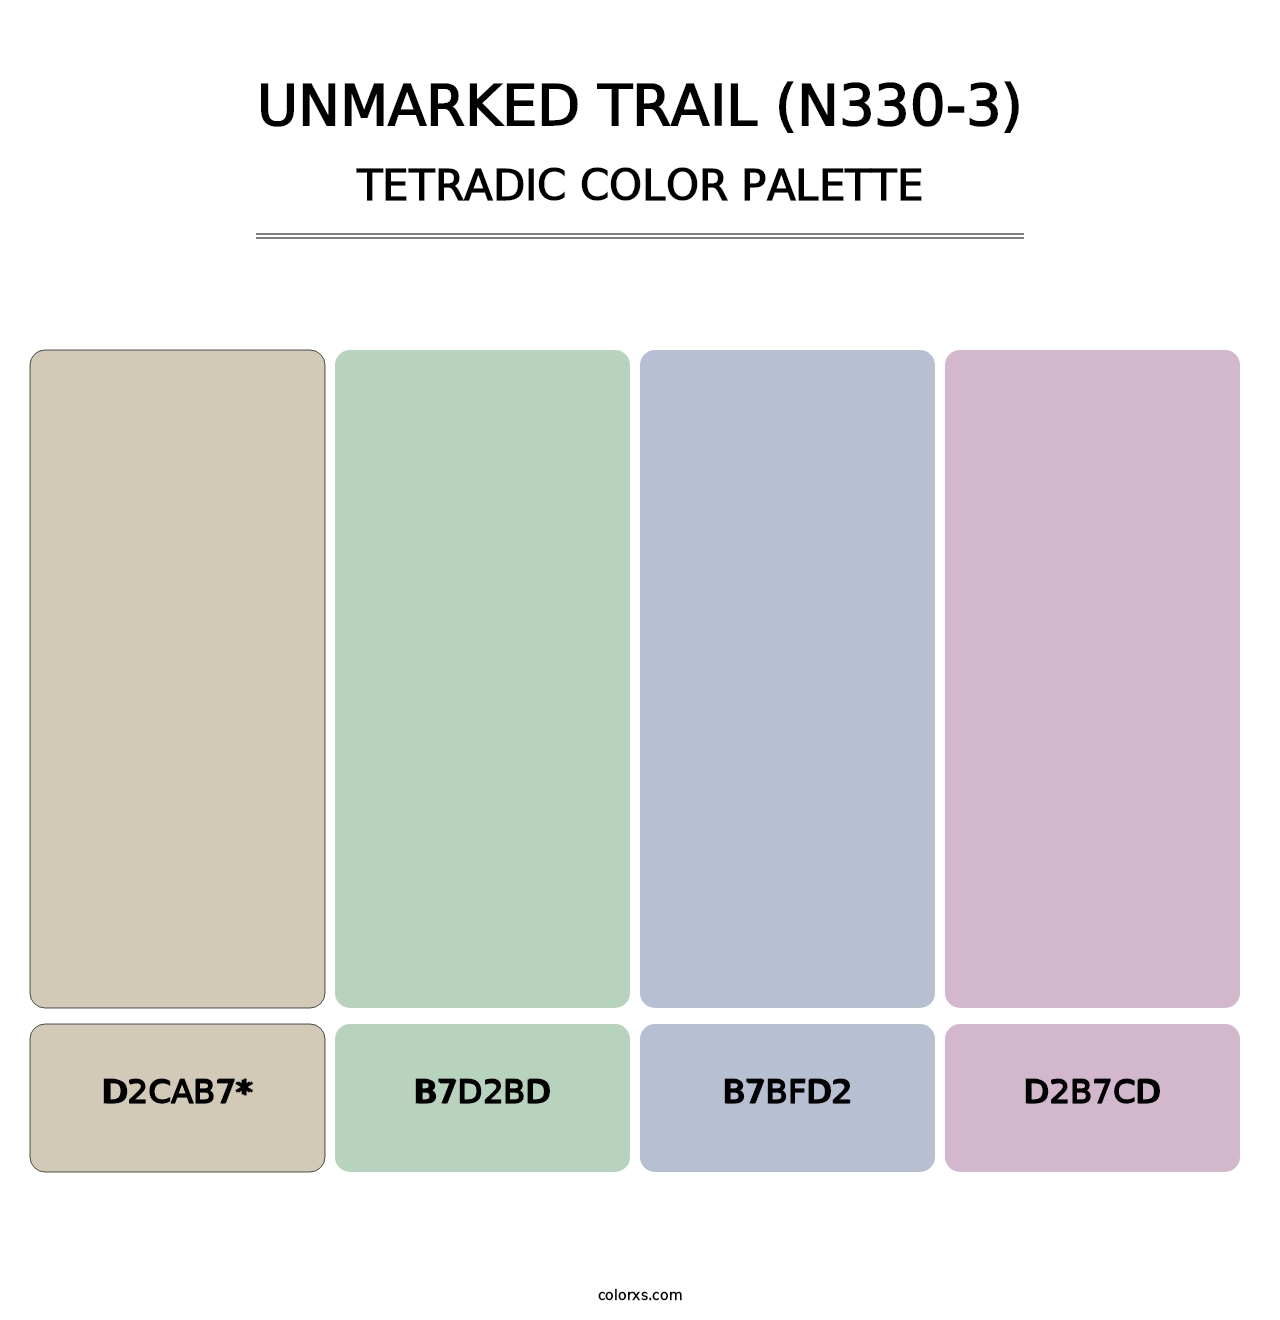 Unmarked Trail (N330-3) - Tetradic Color Palette